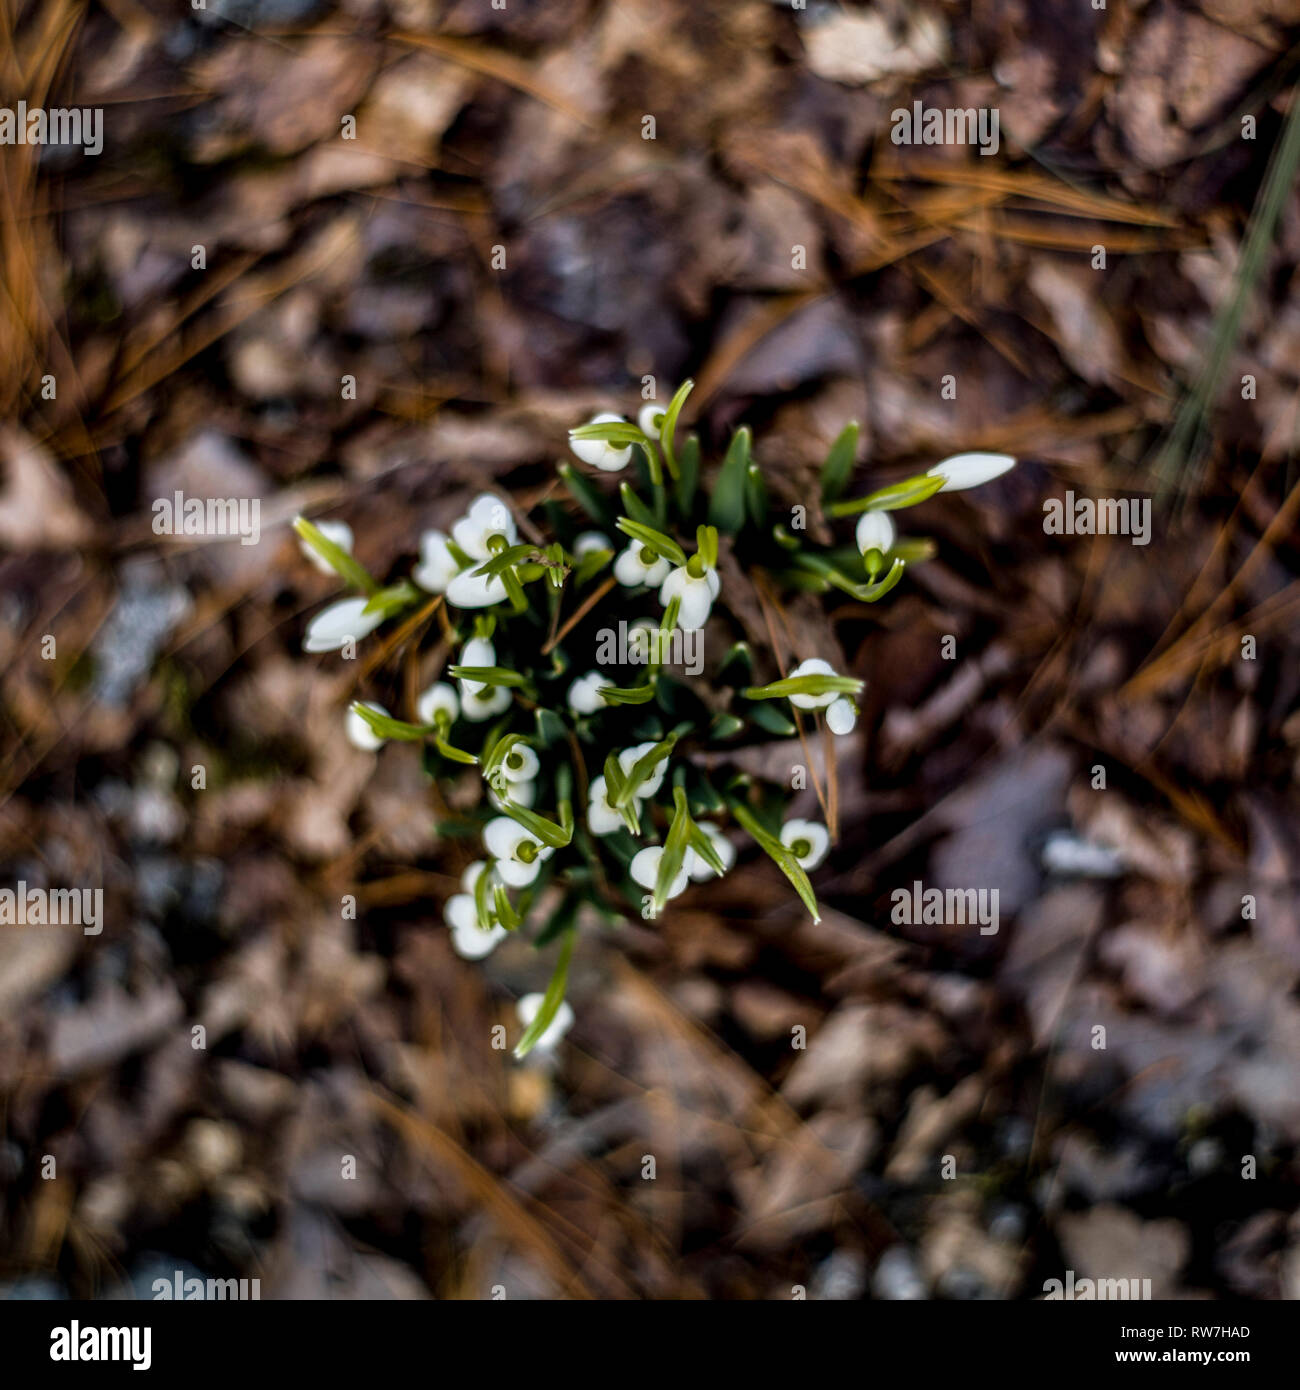 High Angle View of Snowdrops Emerging through Fallen Leaves and Light Snow Stock Photo